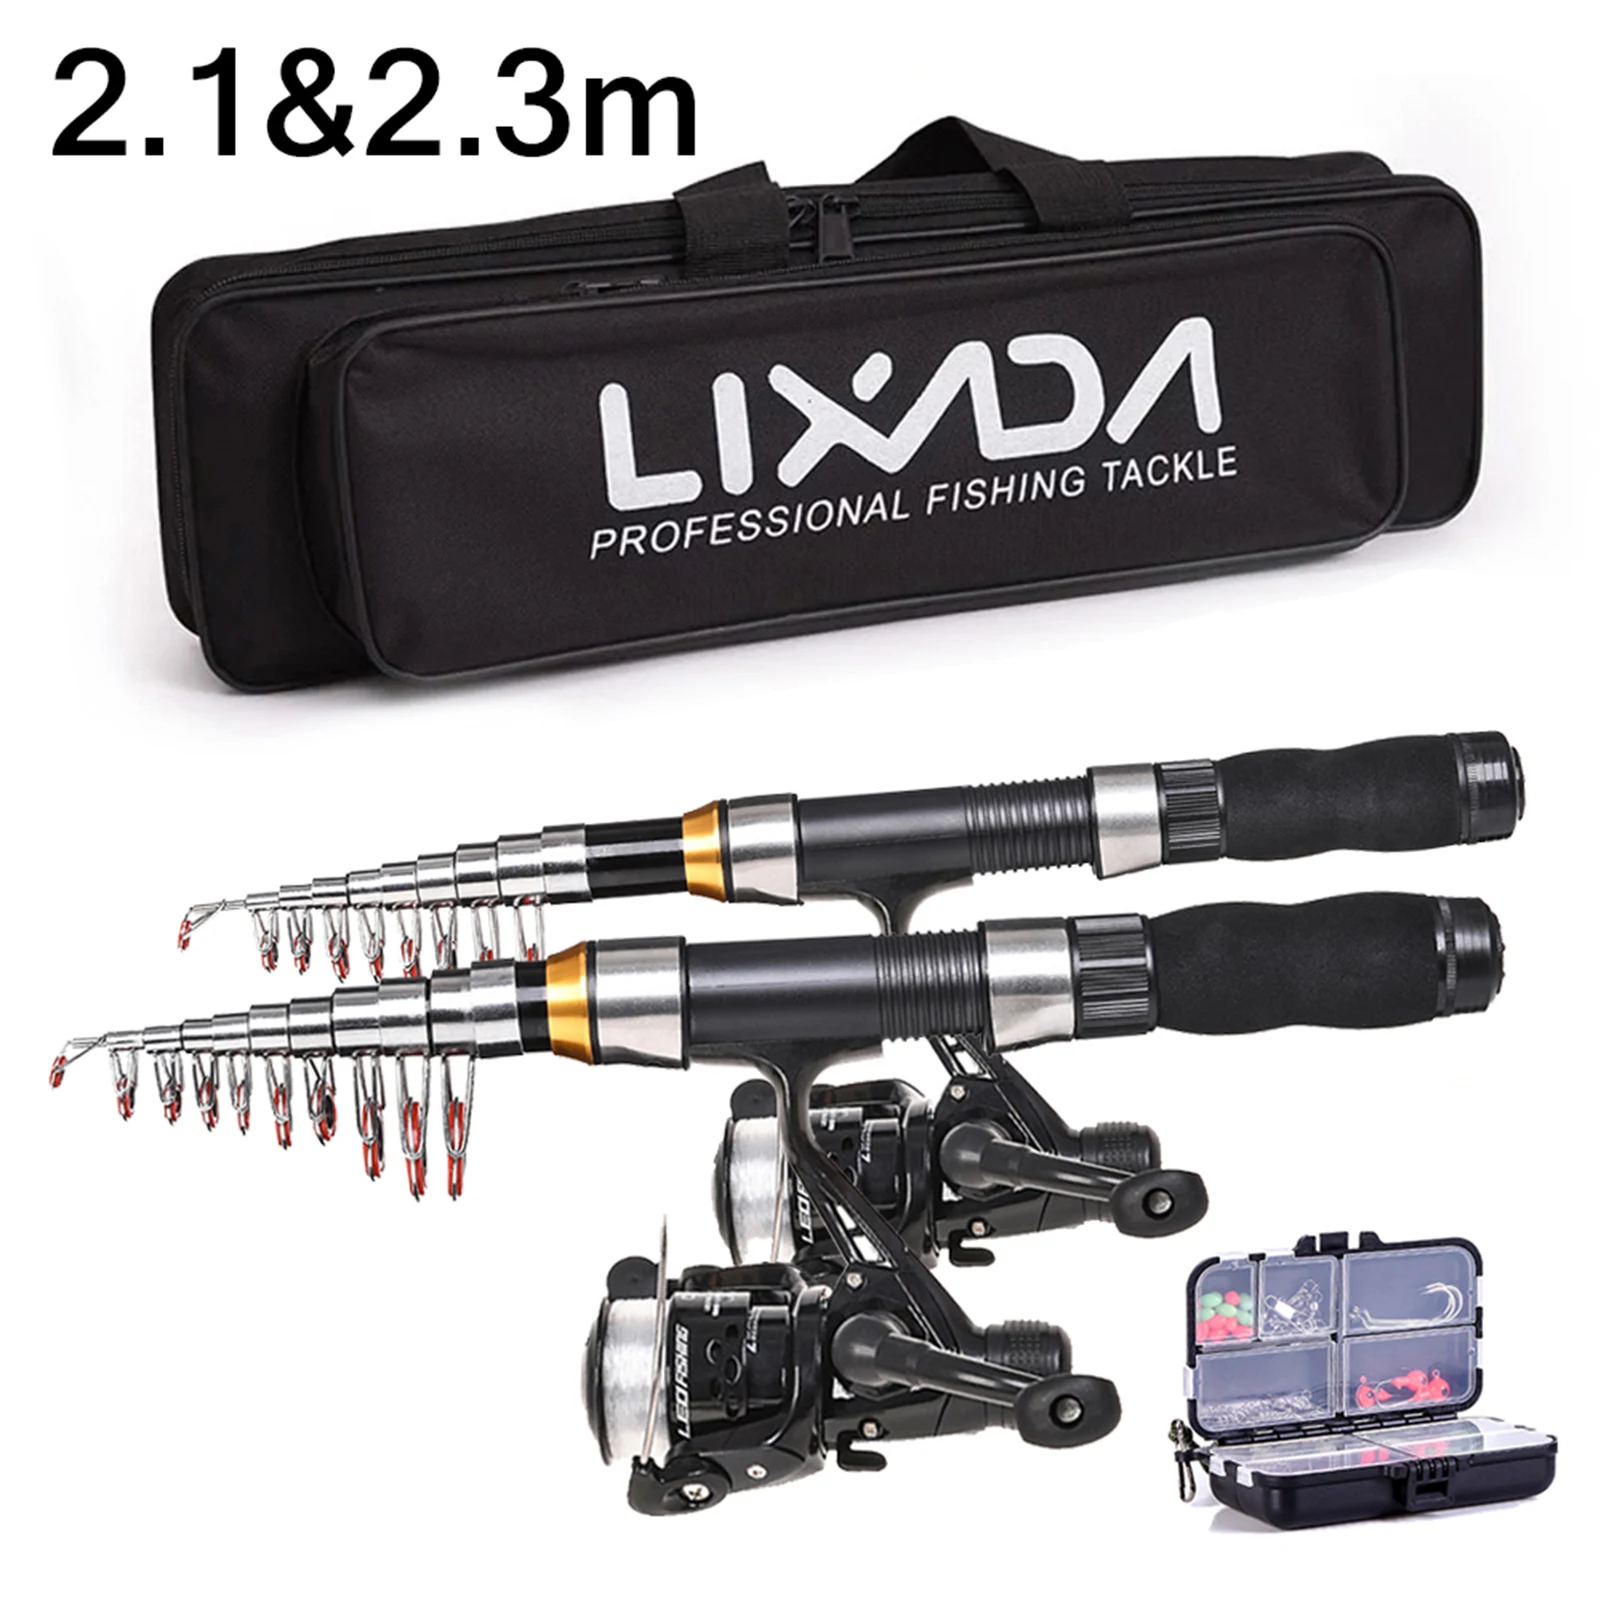 

Lixada Fishing Rod Reel Combo Full Kit with 2.1m 2.3m Telescopic Fishing Rods 2PCS Spinning Reels Set with Hooks Soft Lures Bag